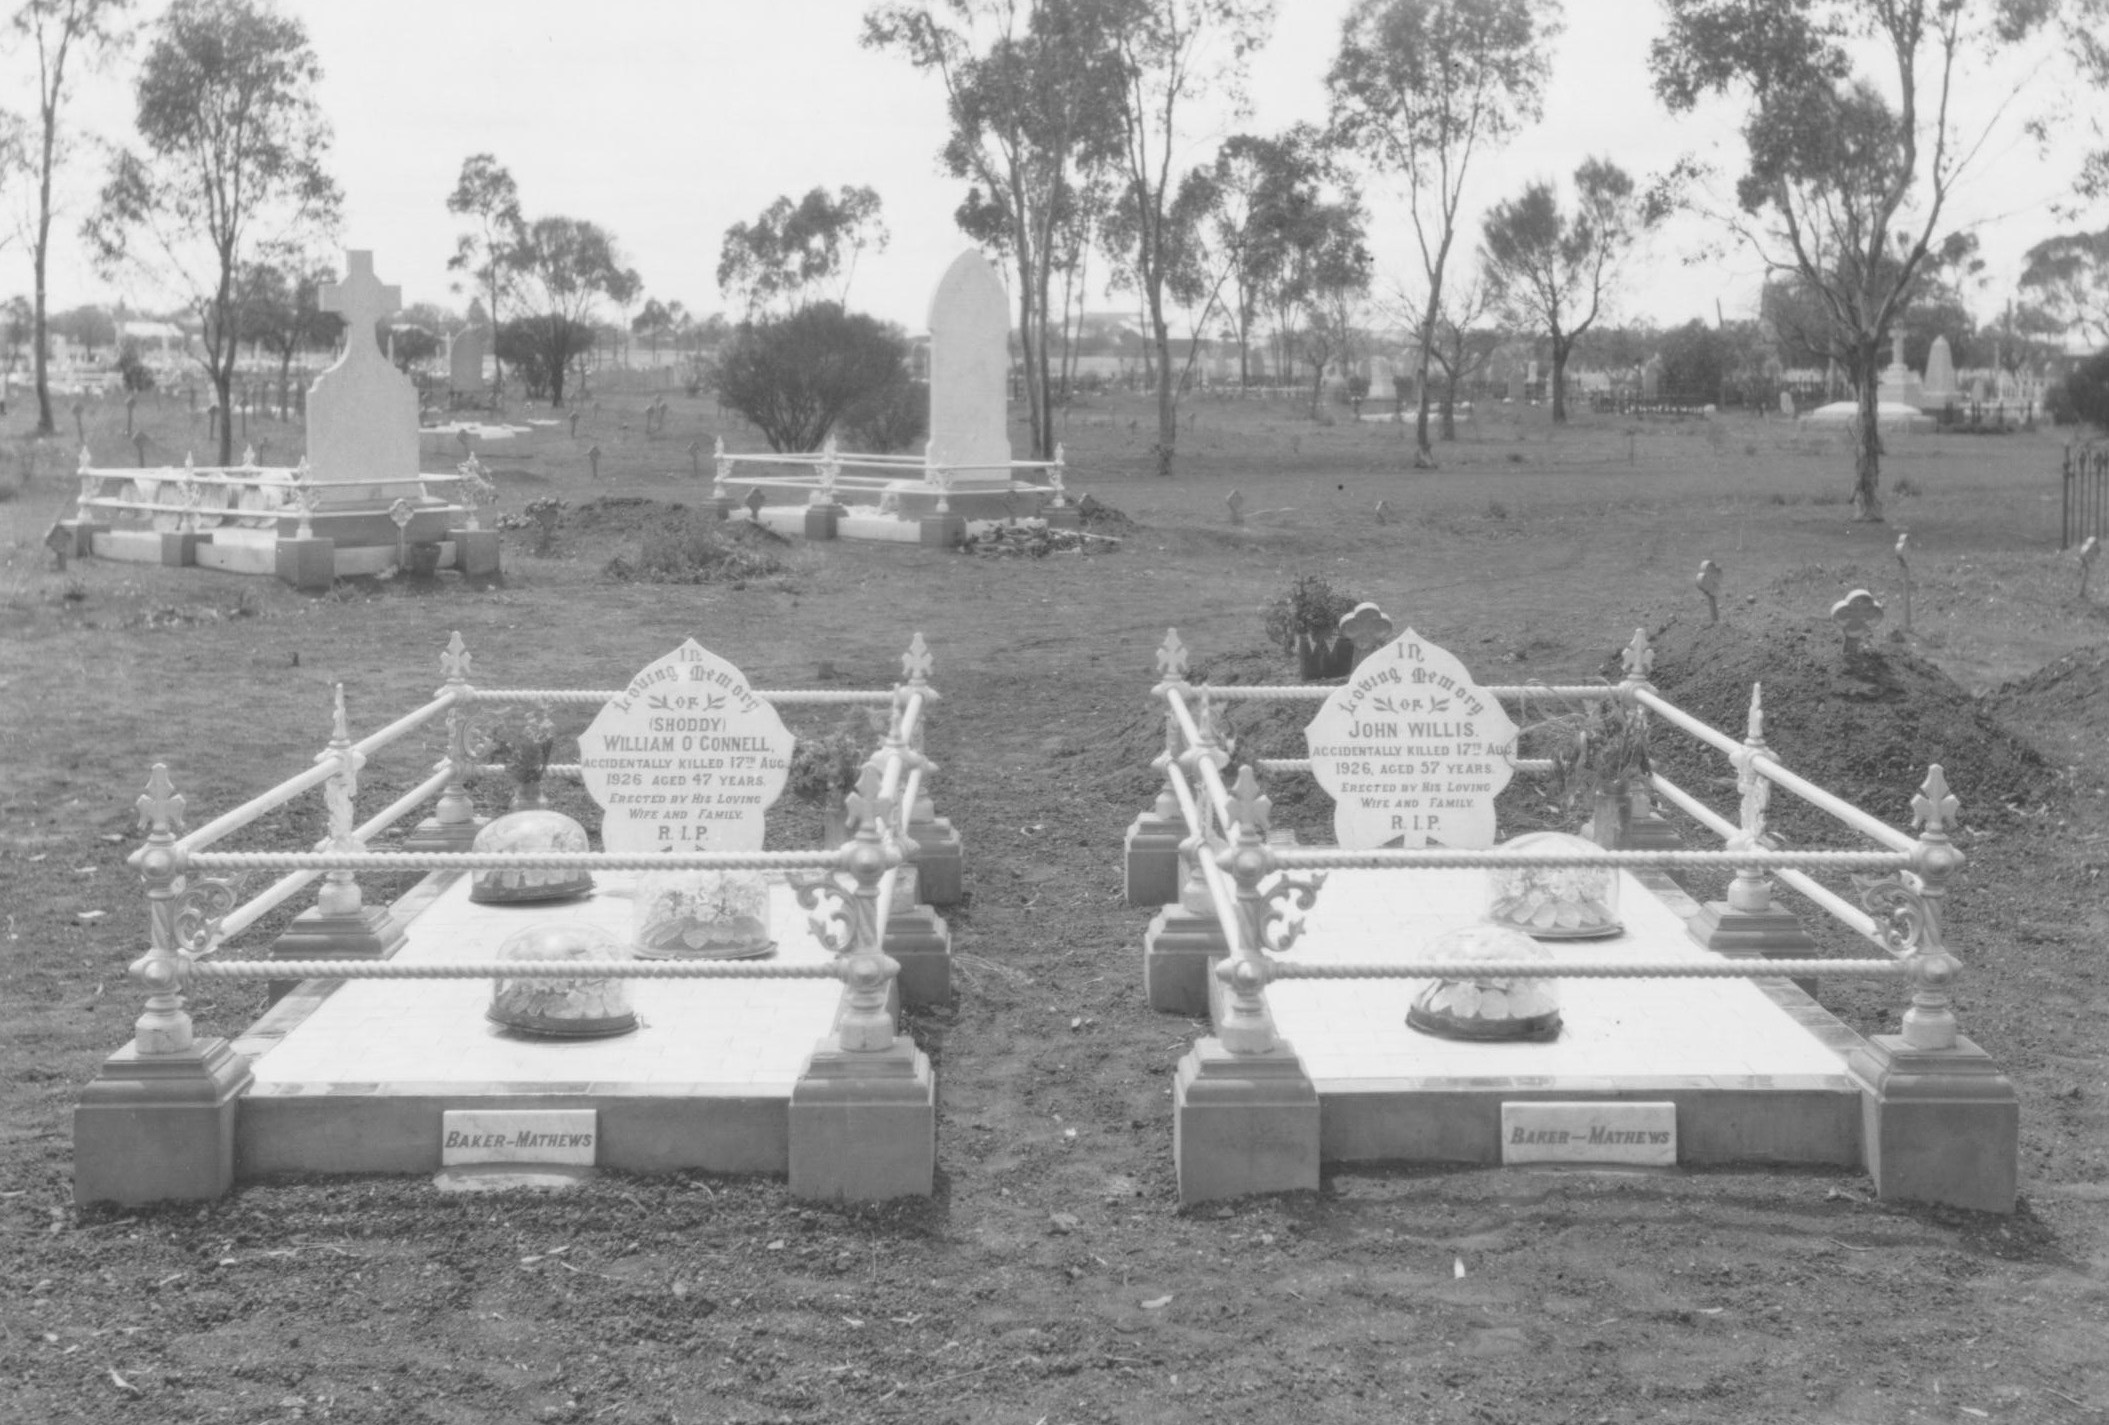 Graves of William O'Connell and John Willis at the Kalgoorlie Cemetery